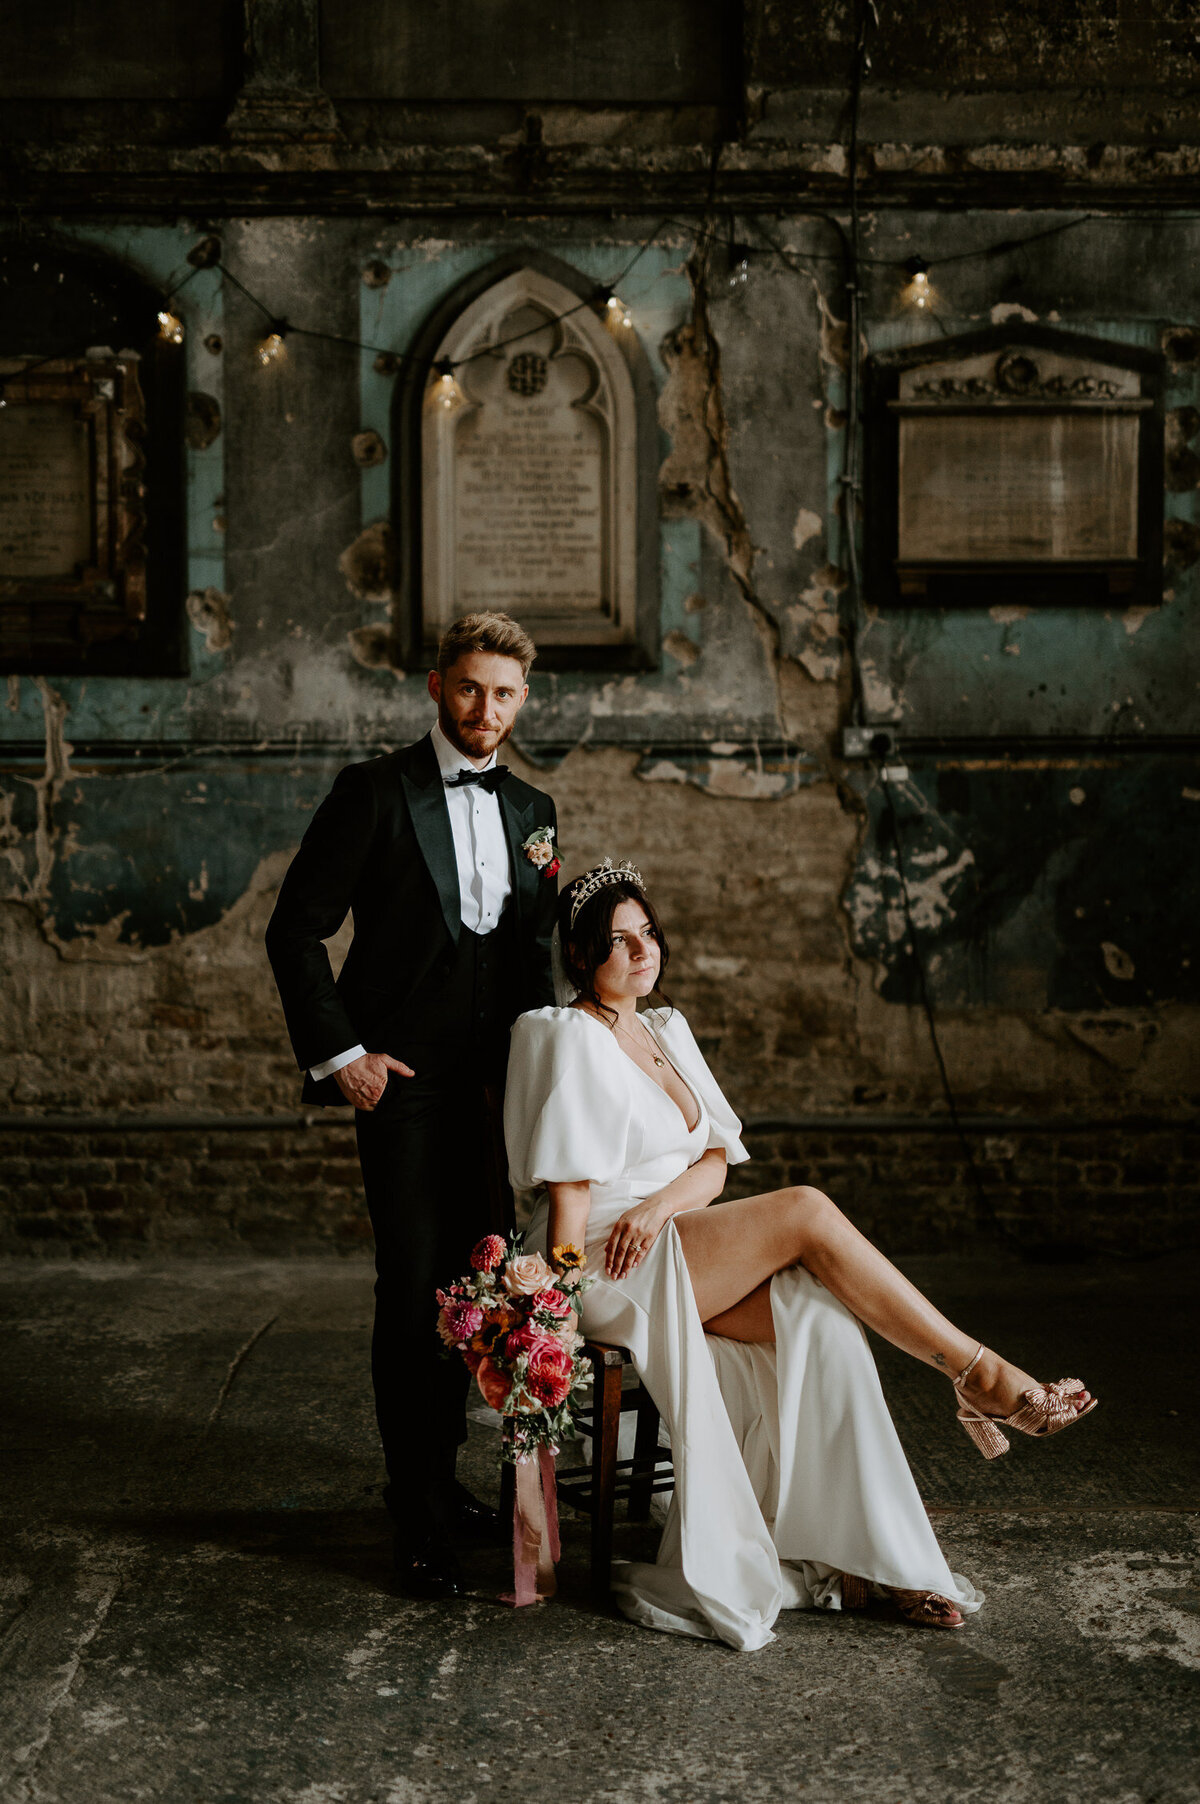 A groom stands over his bride who is sat on a chair after their wedding at The Asylum Chapel in London.